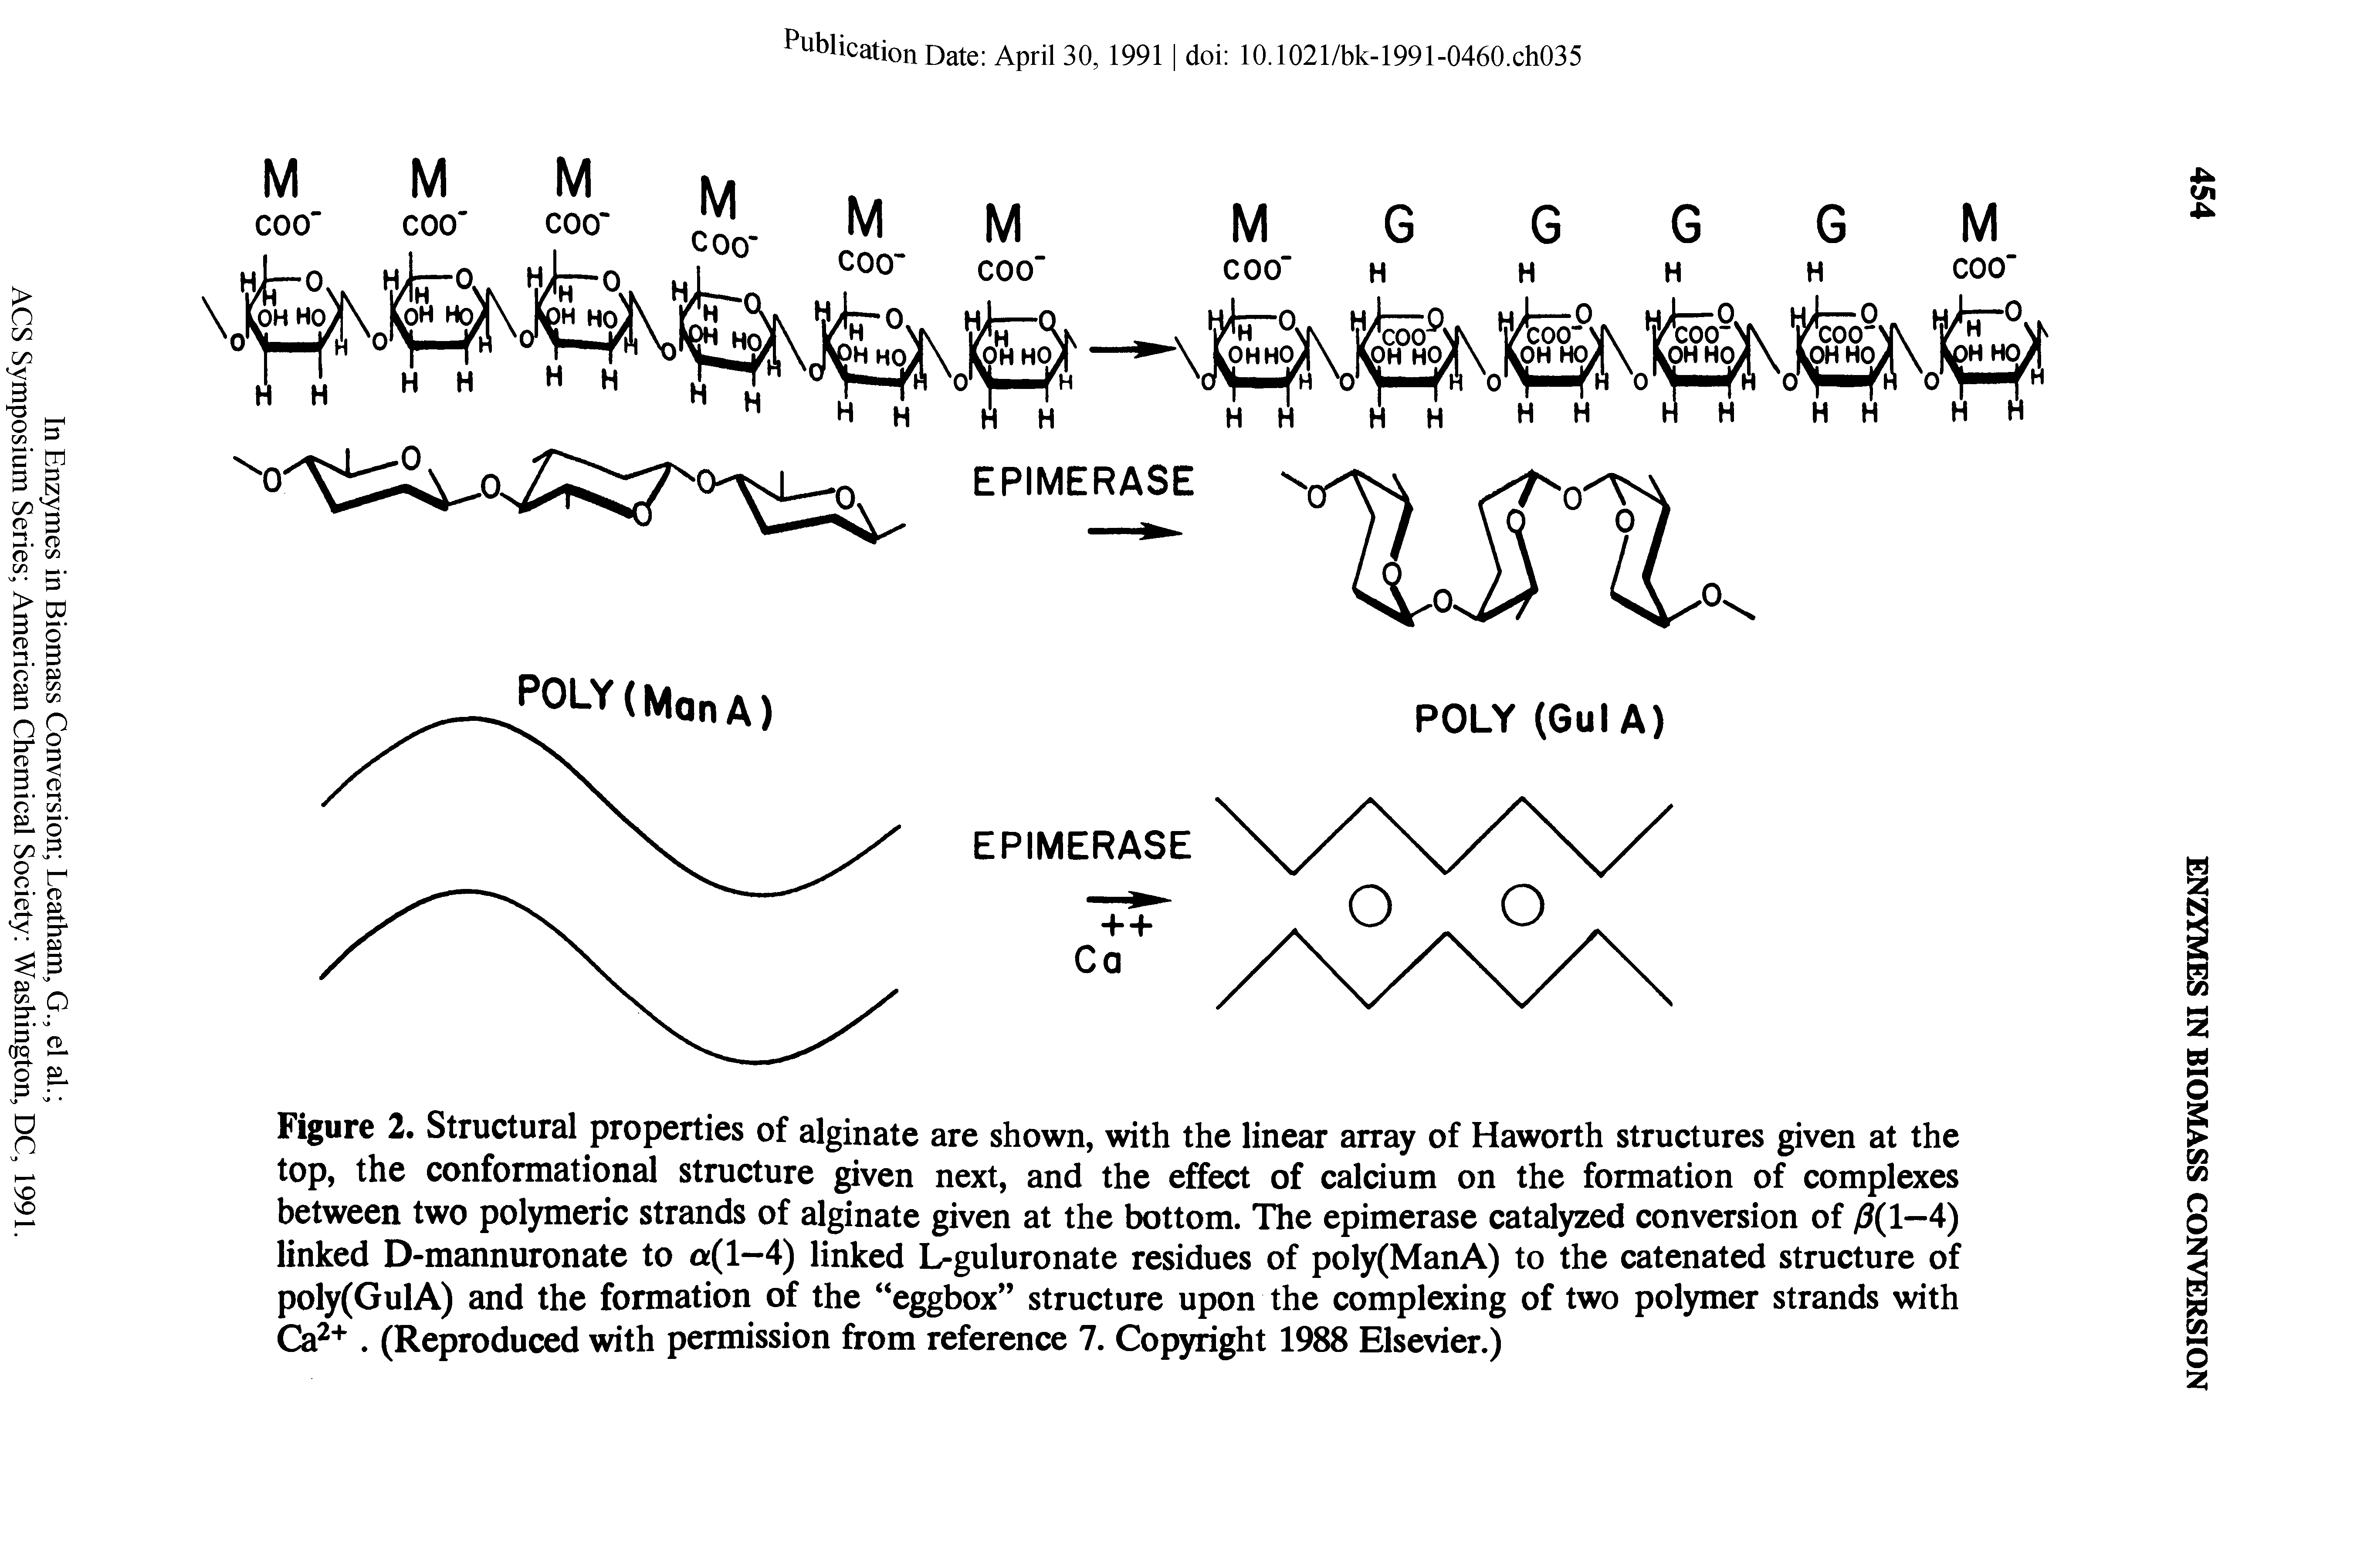 Figure 2. Structural properties of alginate are shown, with the linear array of Haworth structures given at the top, the conformational structure given next, and the effect of calcium on the formation of complexes between two polymeric strands of alginate given at the bottom. The epimerase catalyzed conversion of / ( —4) linked D-mannuronate to a(l—4) linked L-guluronate residues of poly(ManA) to the catenated structure of poly(GulA) and the formation of the eggbox structure upon the complexing of two polymer strands with Ca. (Reproduced with permission from reference 7. Copyright 1988 Elsevier.)...